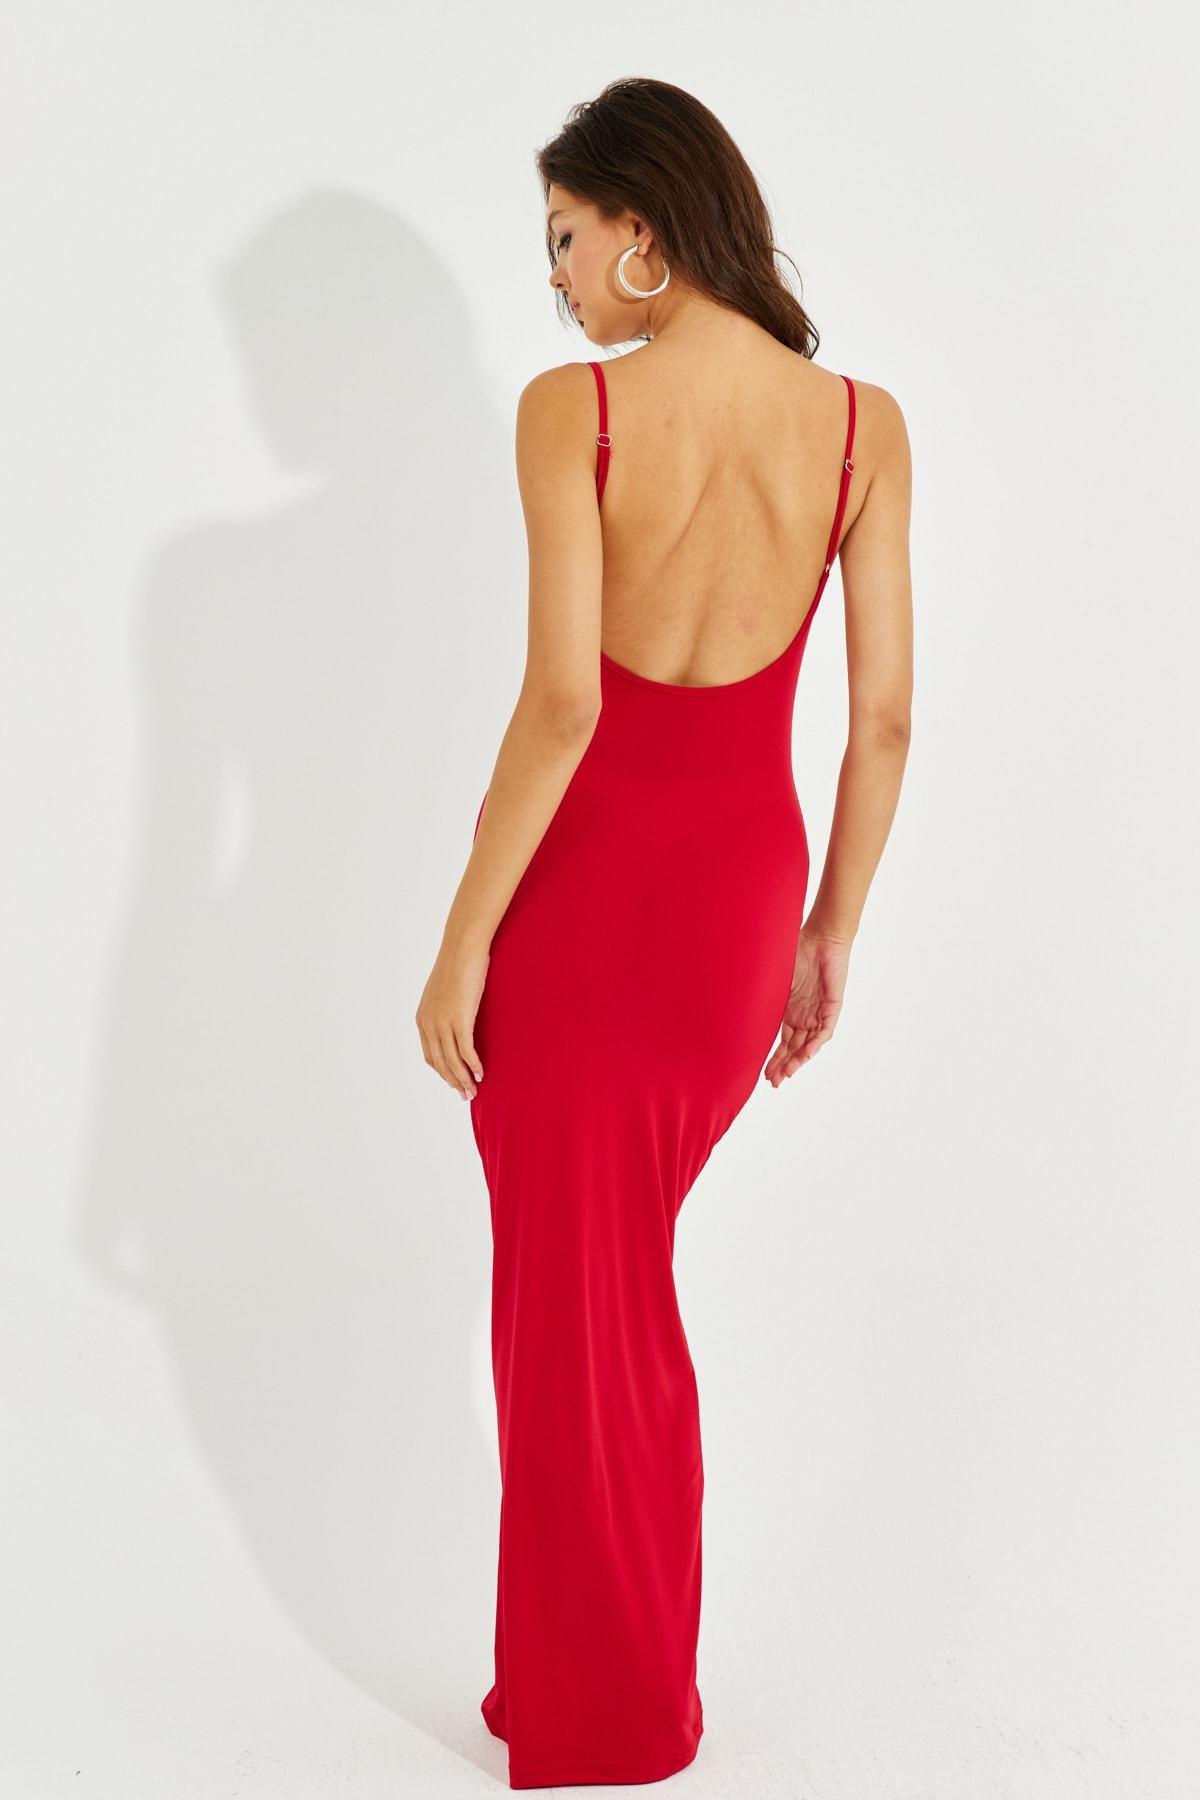 Cool & Sexy - Red Adjustable Straps Maxi Dress